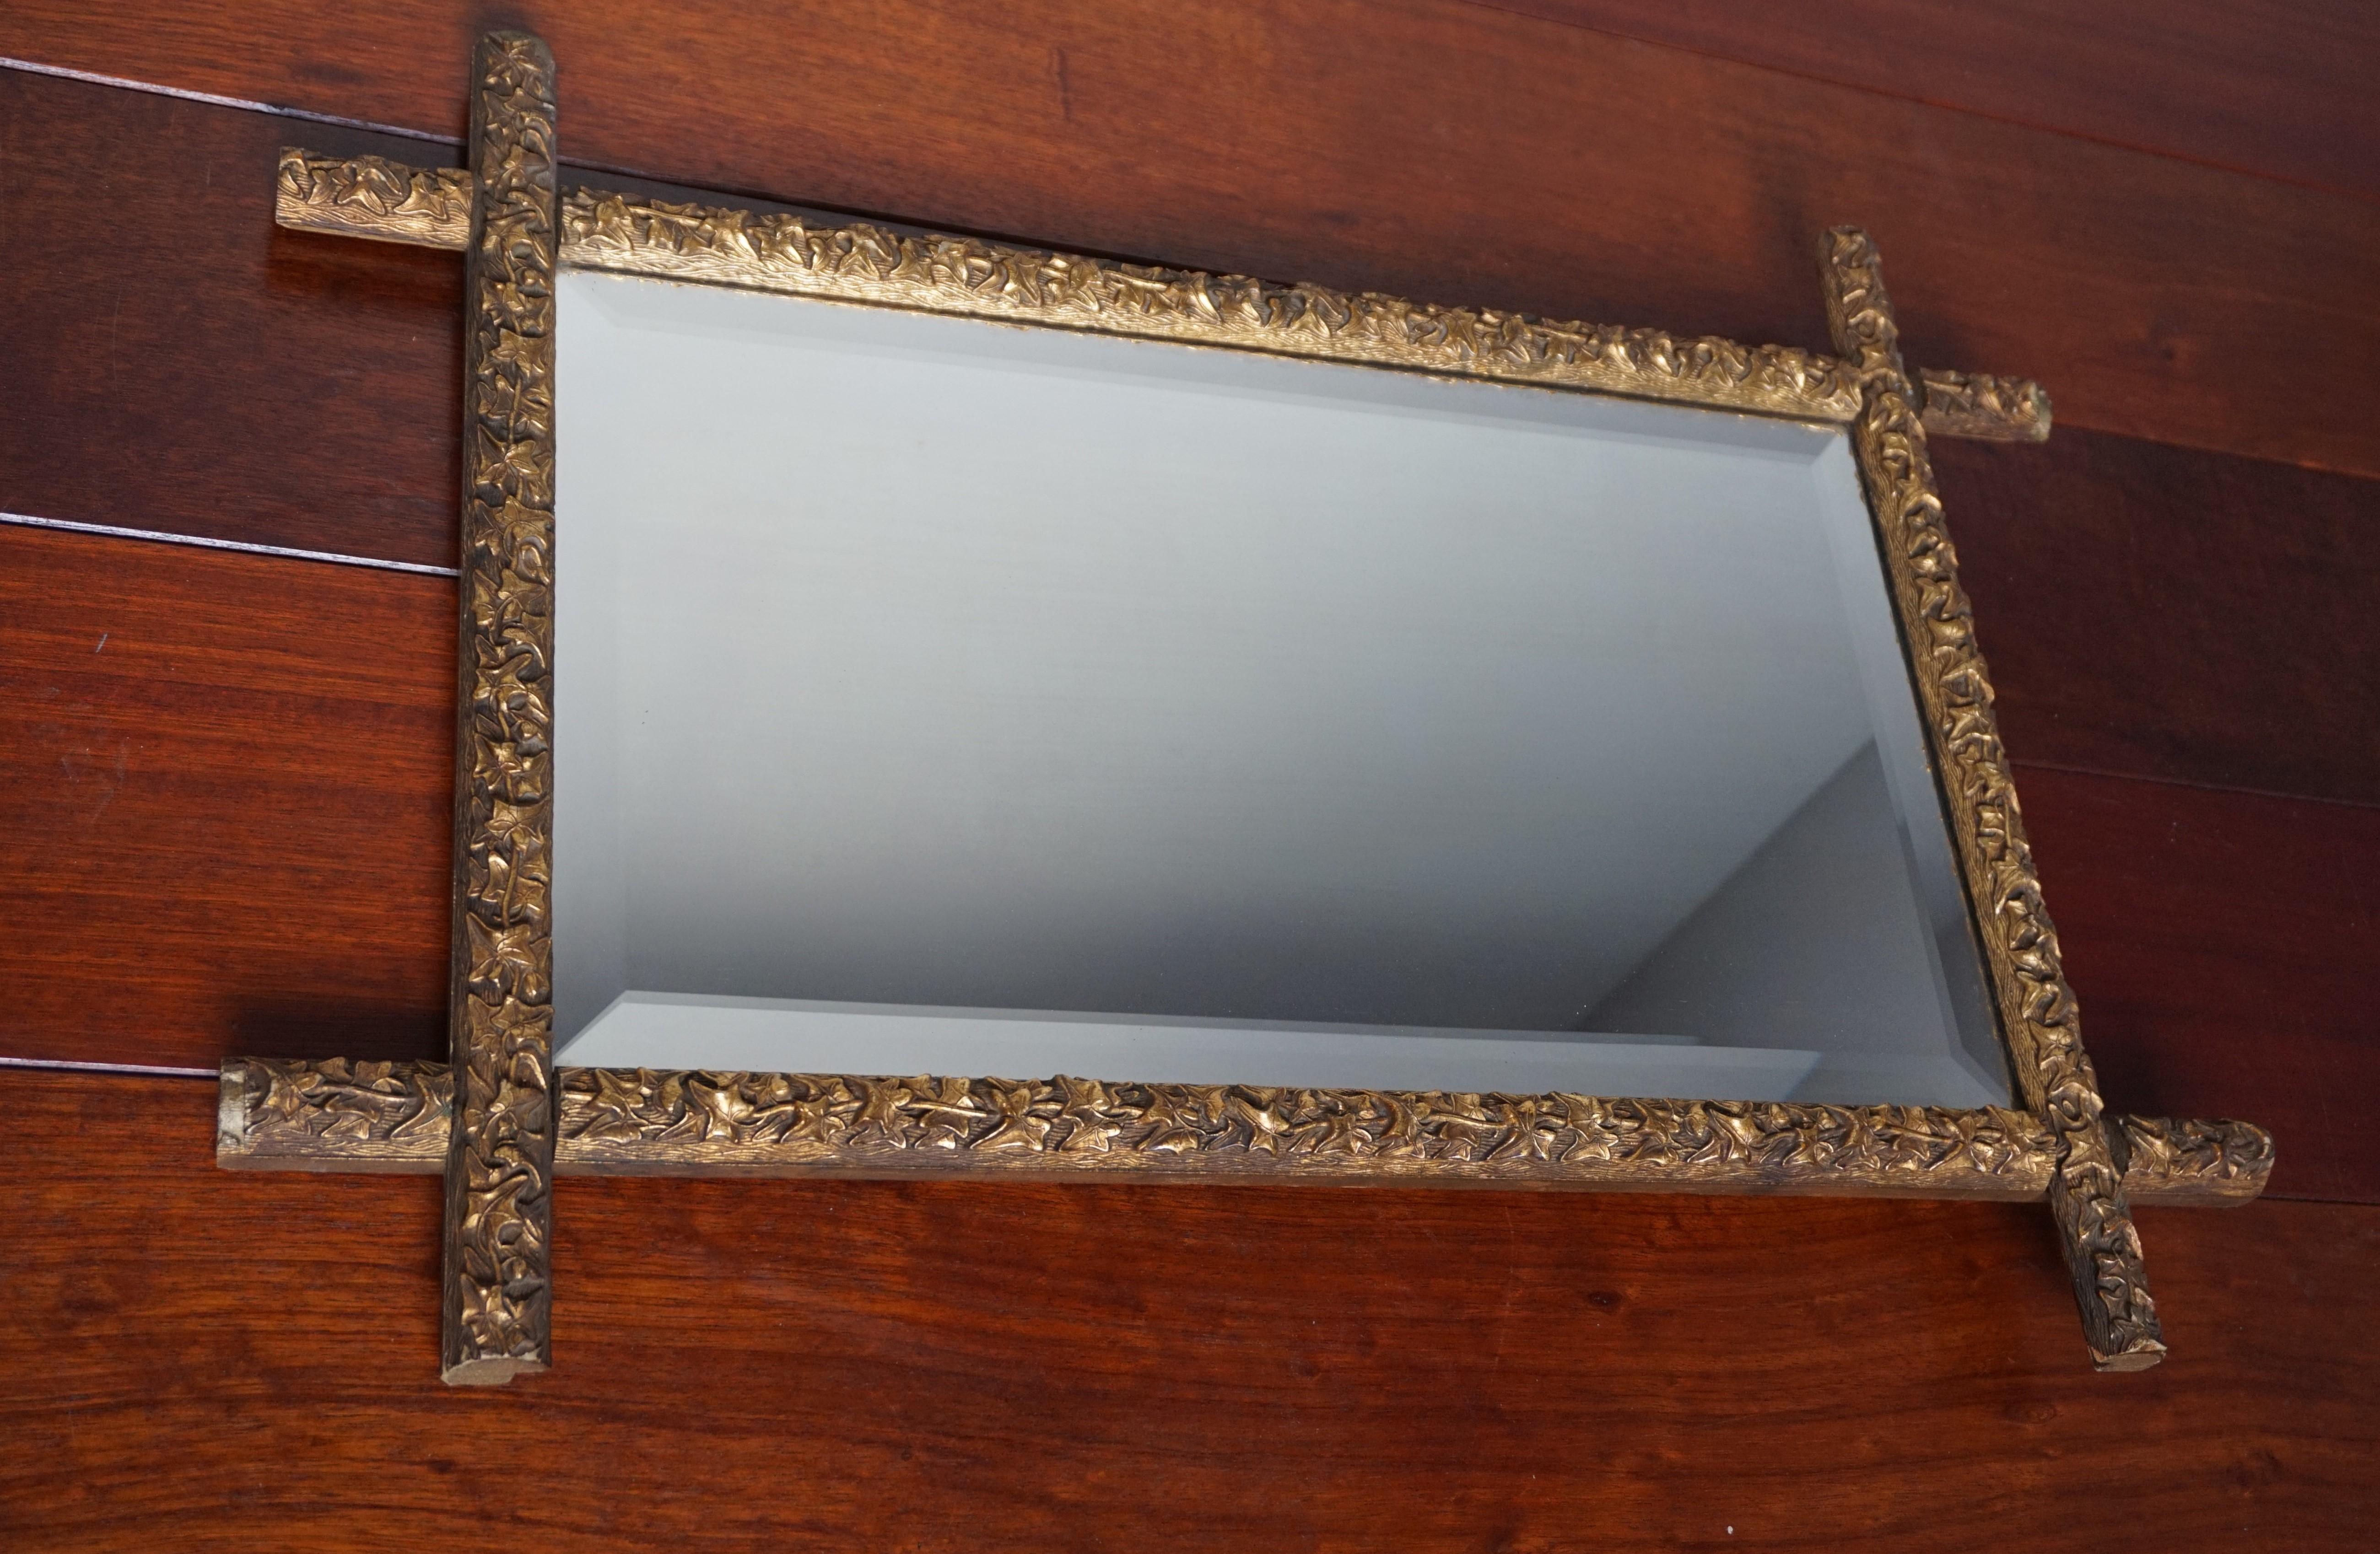 Antique Handcrafted Gothic Revival Gilt Leafs on Wooden Frame 1880s Cross Mirror For Sale 6